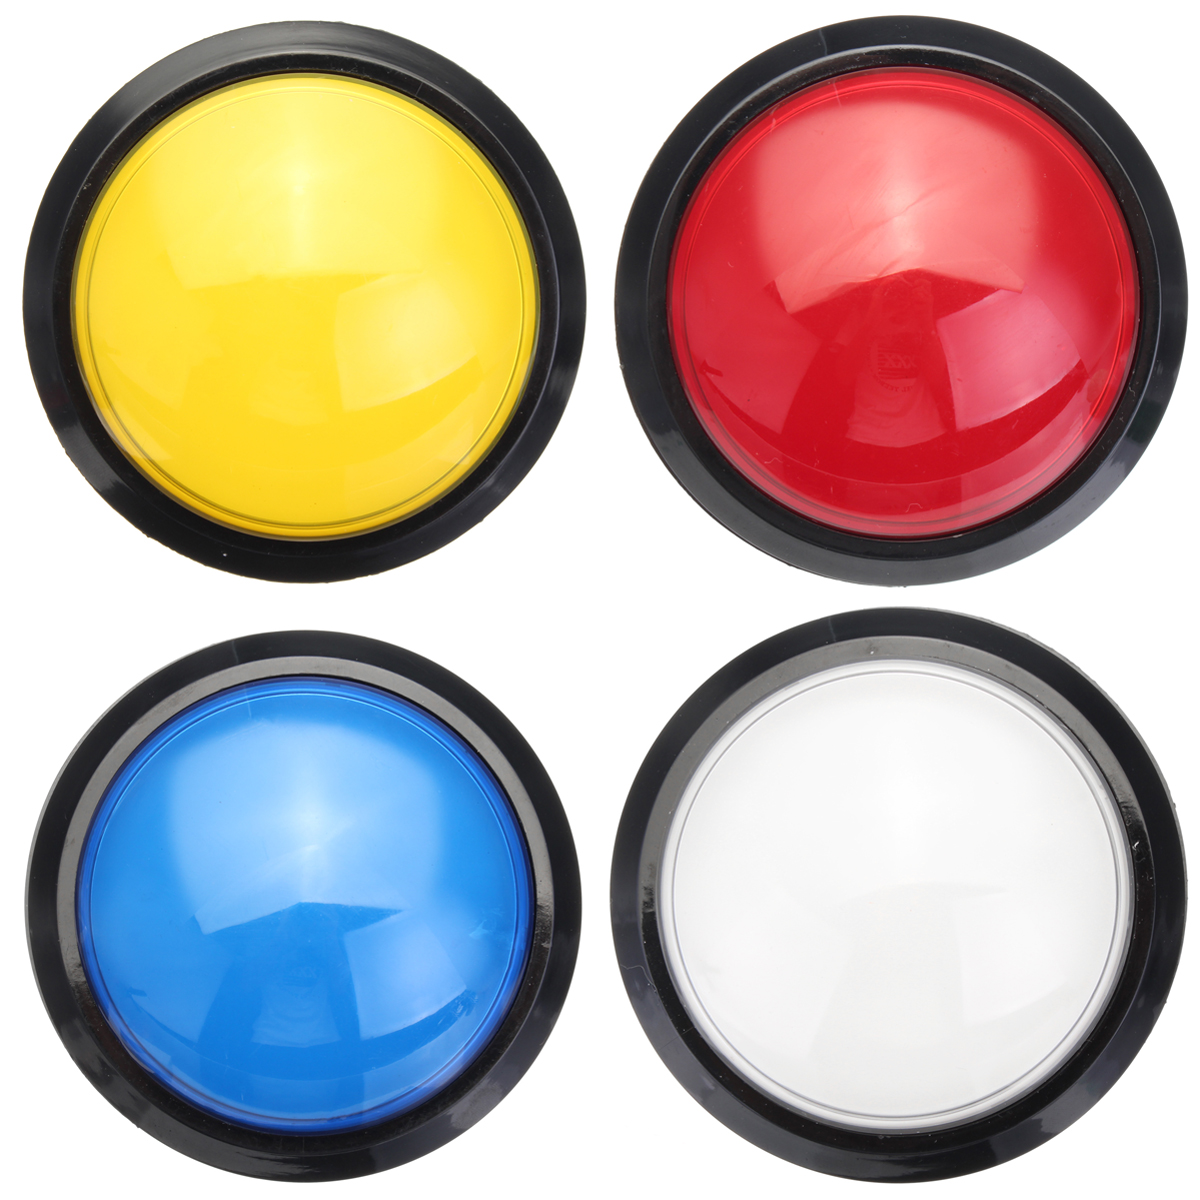 100mm Massive Arcade Button with LED Convexity Console Replacement Button 29